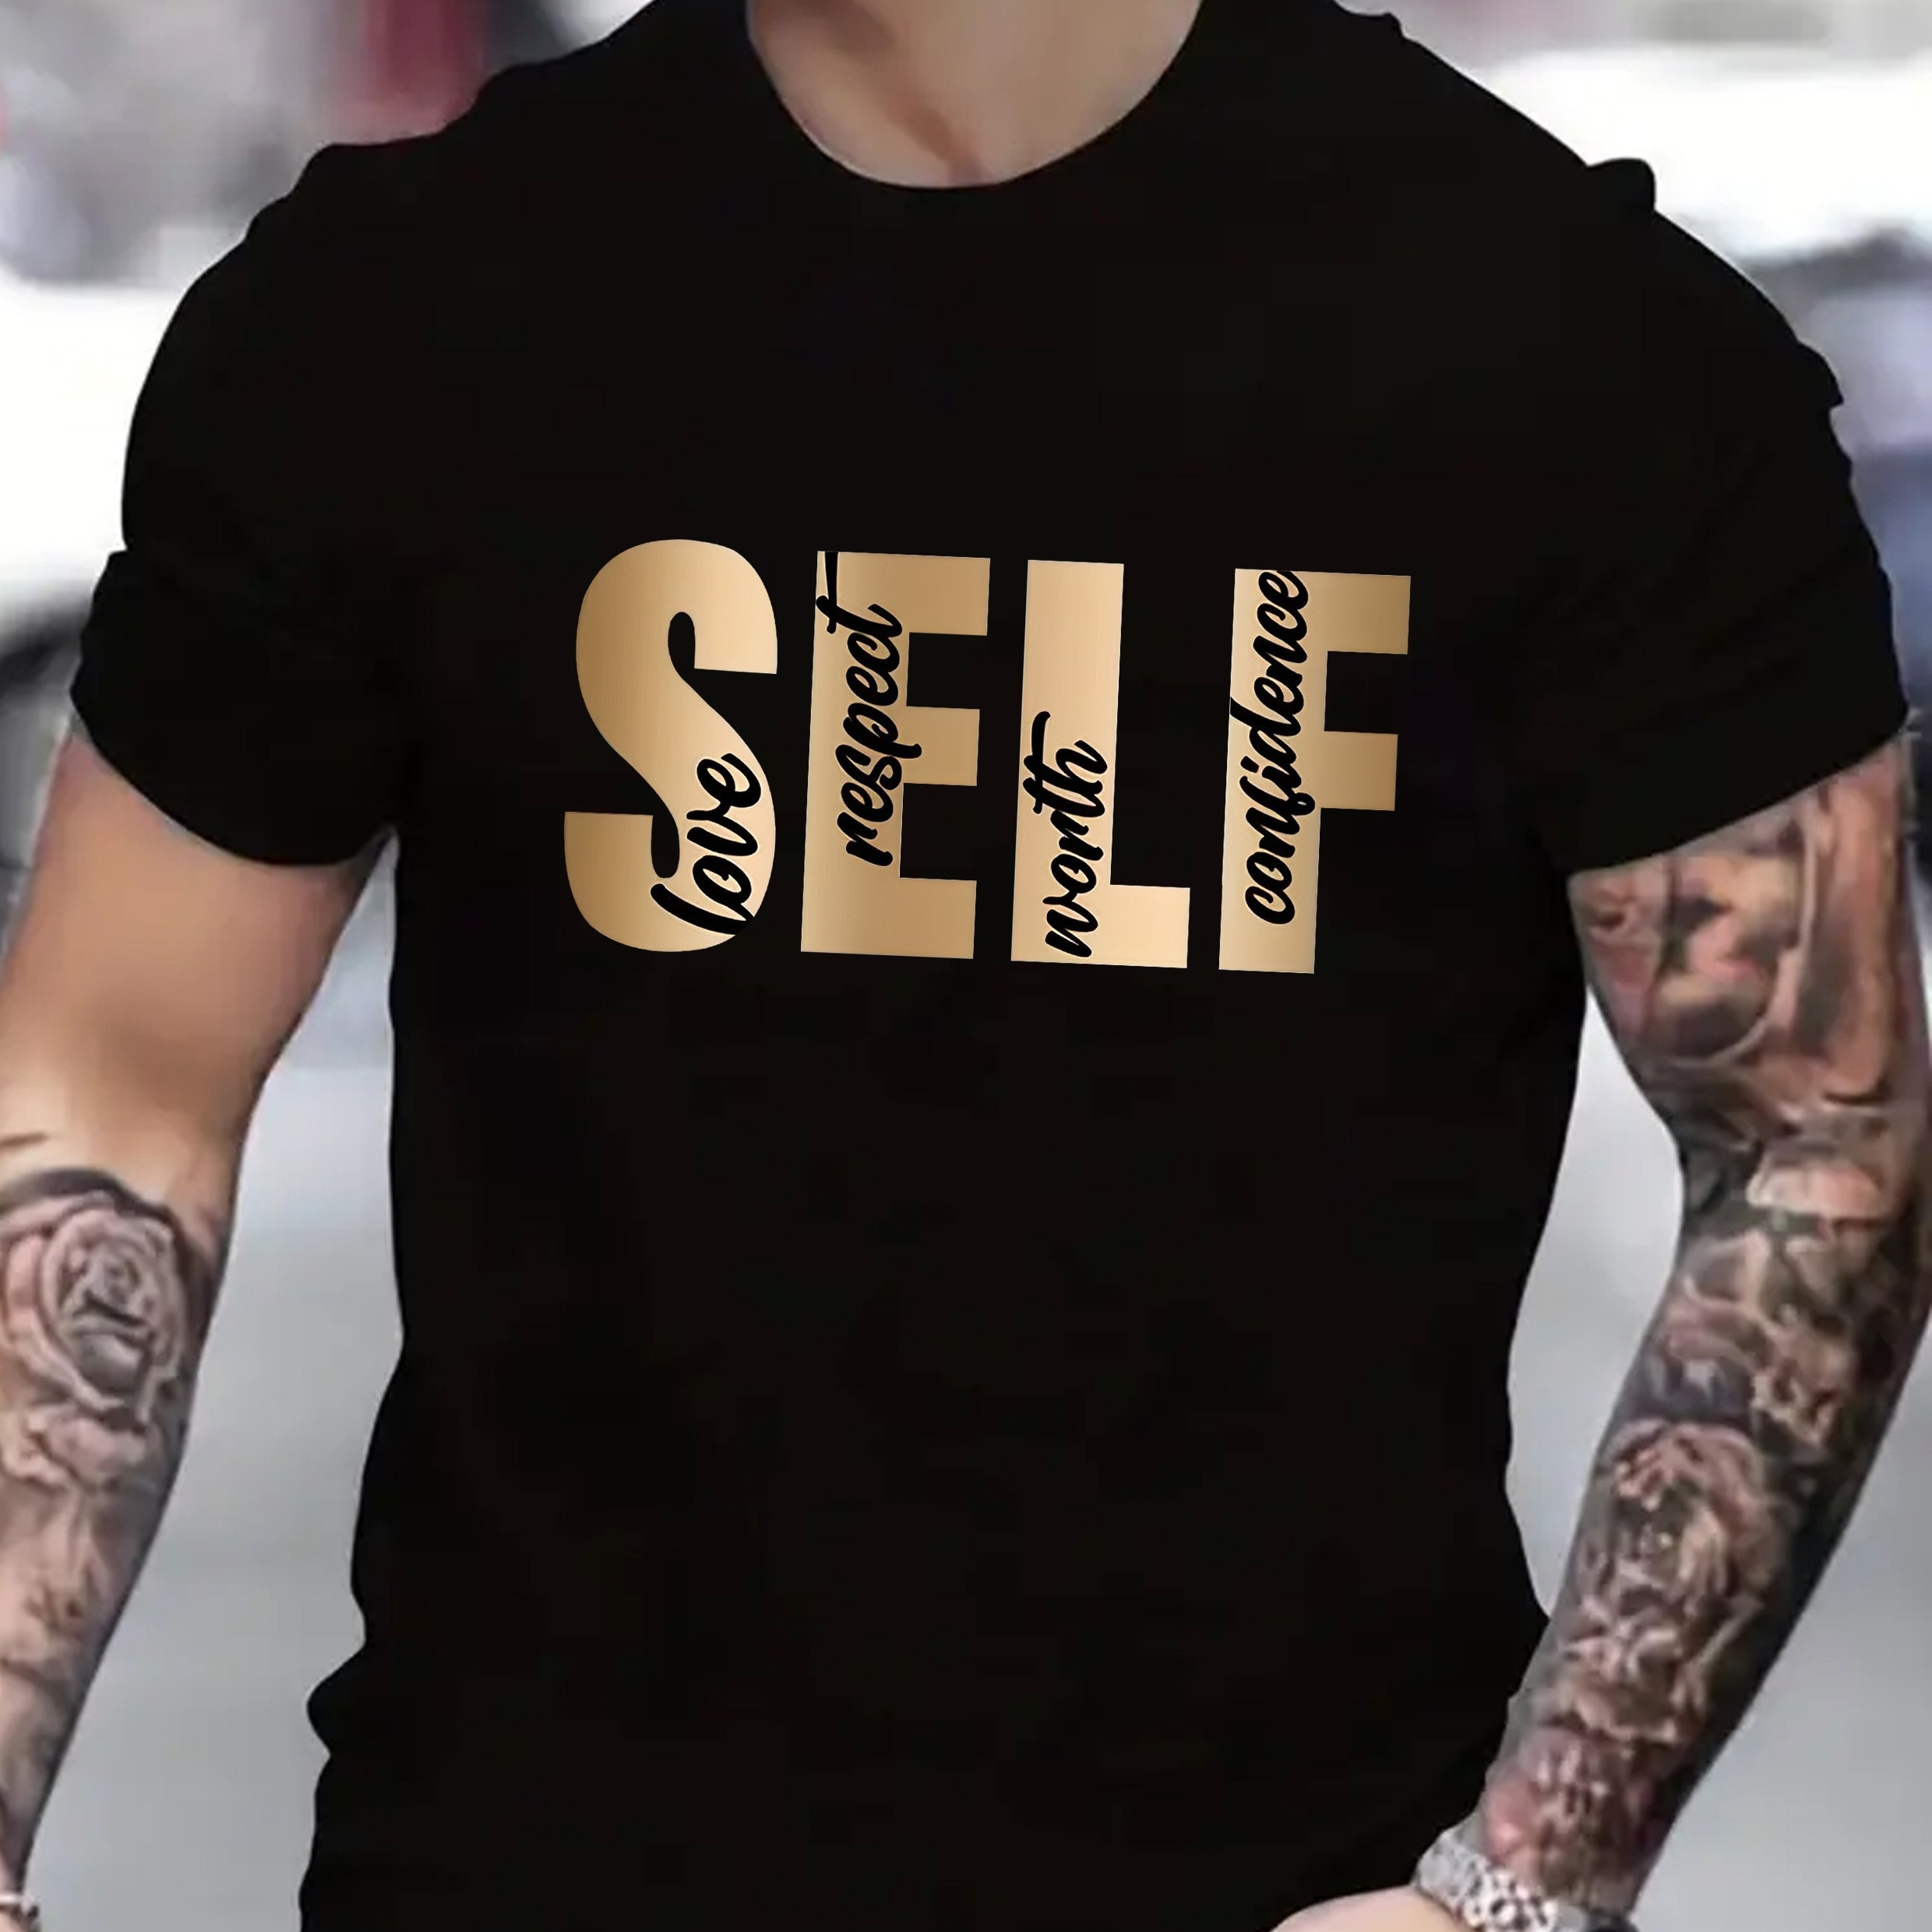 

Self Print, Men's Graphic Design Crew Neck Active T-shirt, Casual Comfy Tees Tshirts For Summer, Men's Clothing Tops For Daily Gym Workout Running